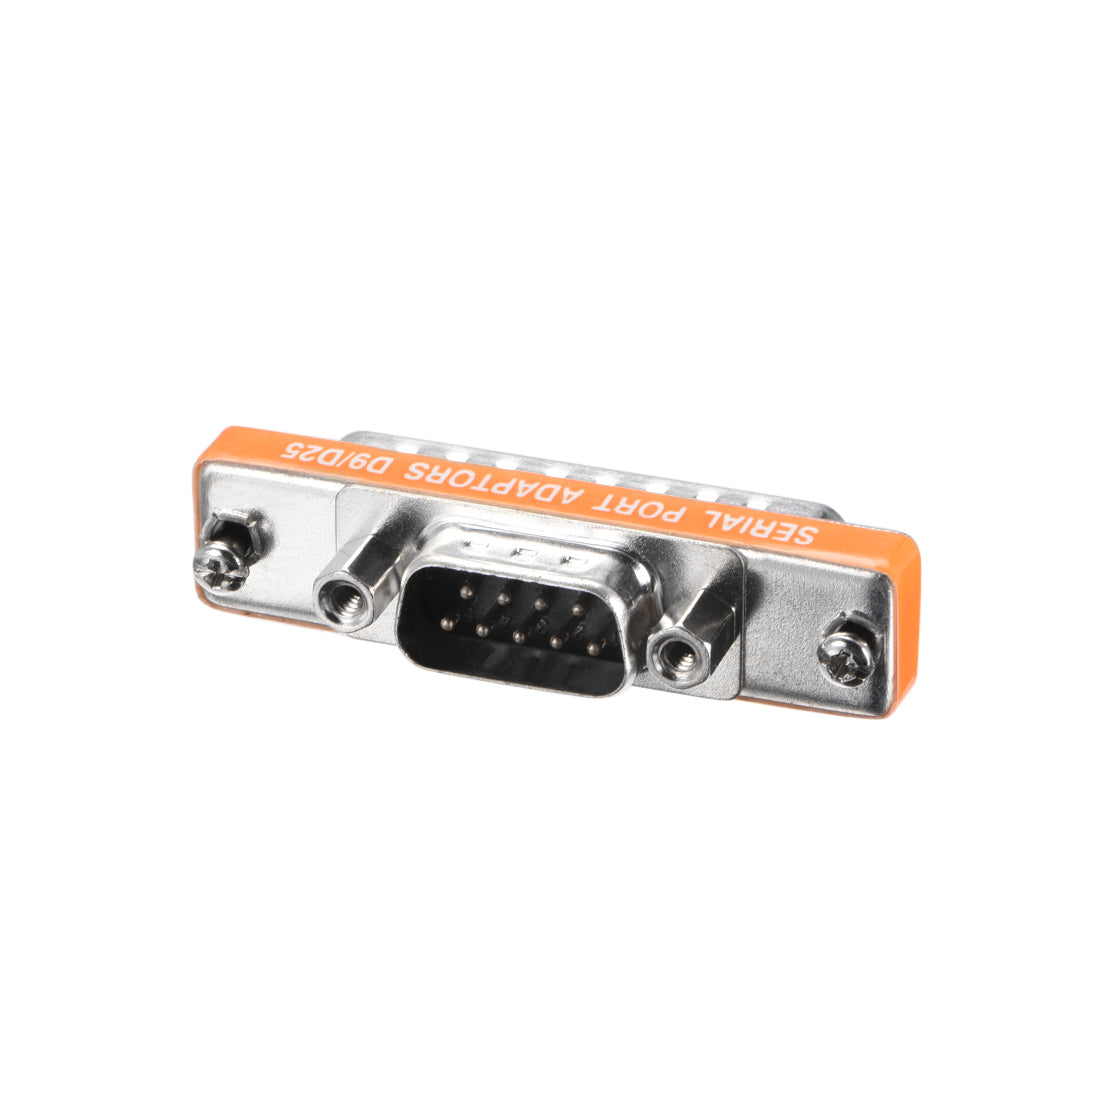 uxcell Uxcell DB25 Male to DB9 VGA Gender Changer 18 PinMale 2-row Mini Gender Changer Coupler Adapter Connector for Serial Applications Orange